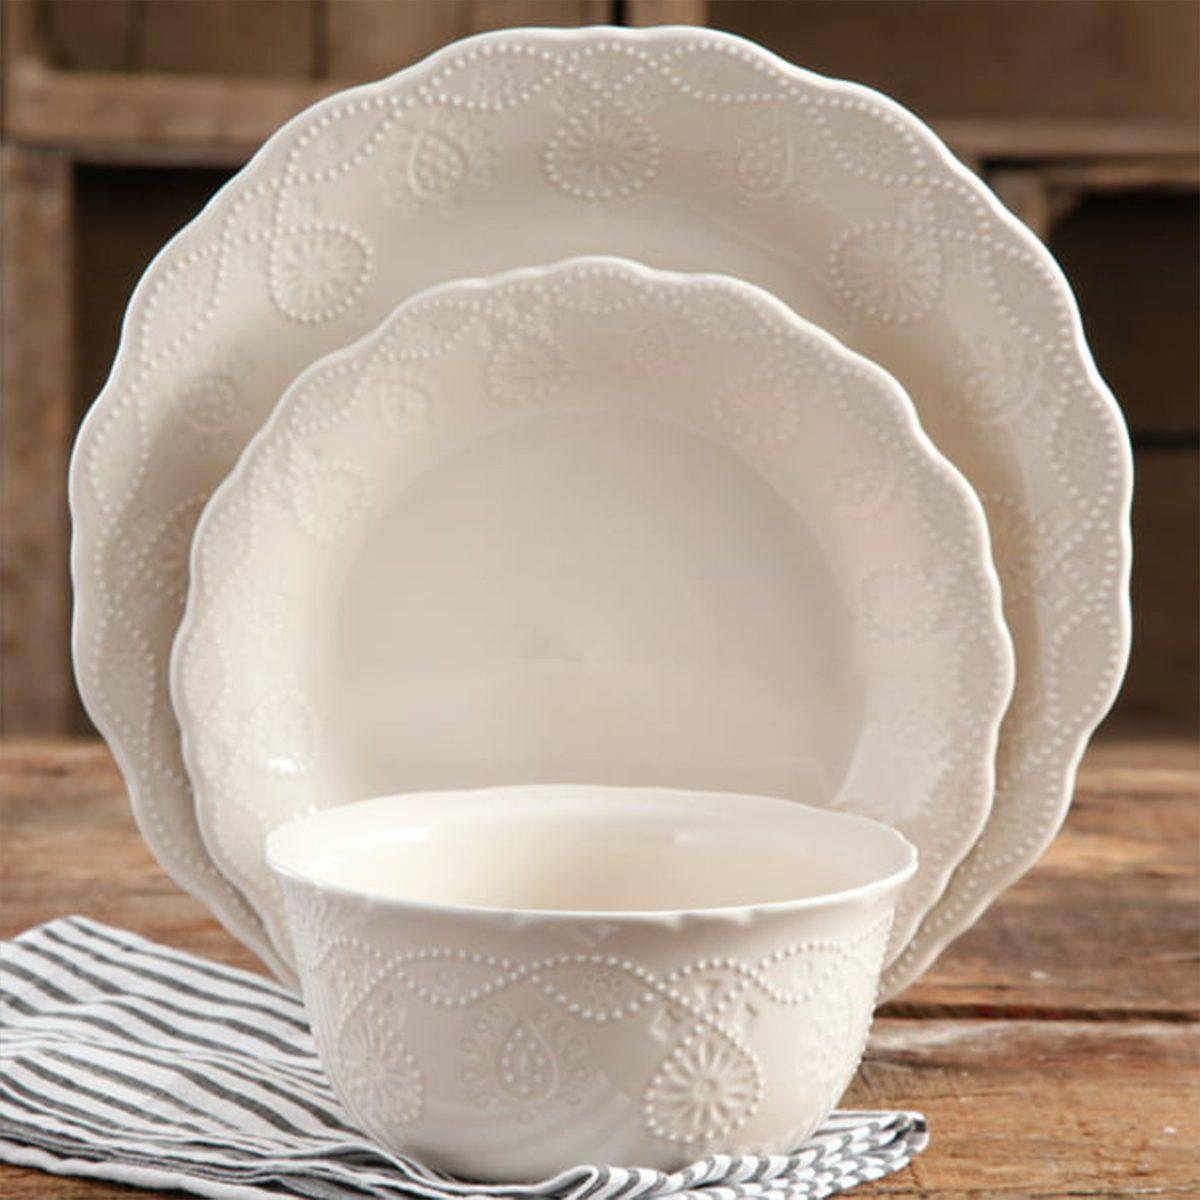 The Pioneer Womans Flea Market Scalloped Edge Serving Bowl Set,  3-Piece (Pack of 2): Serving Bowls